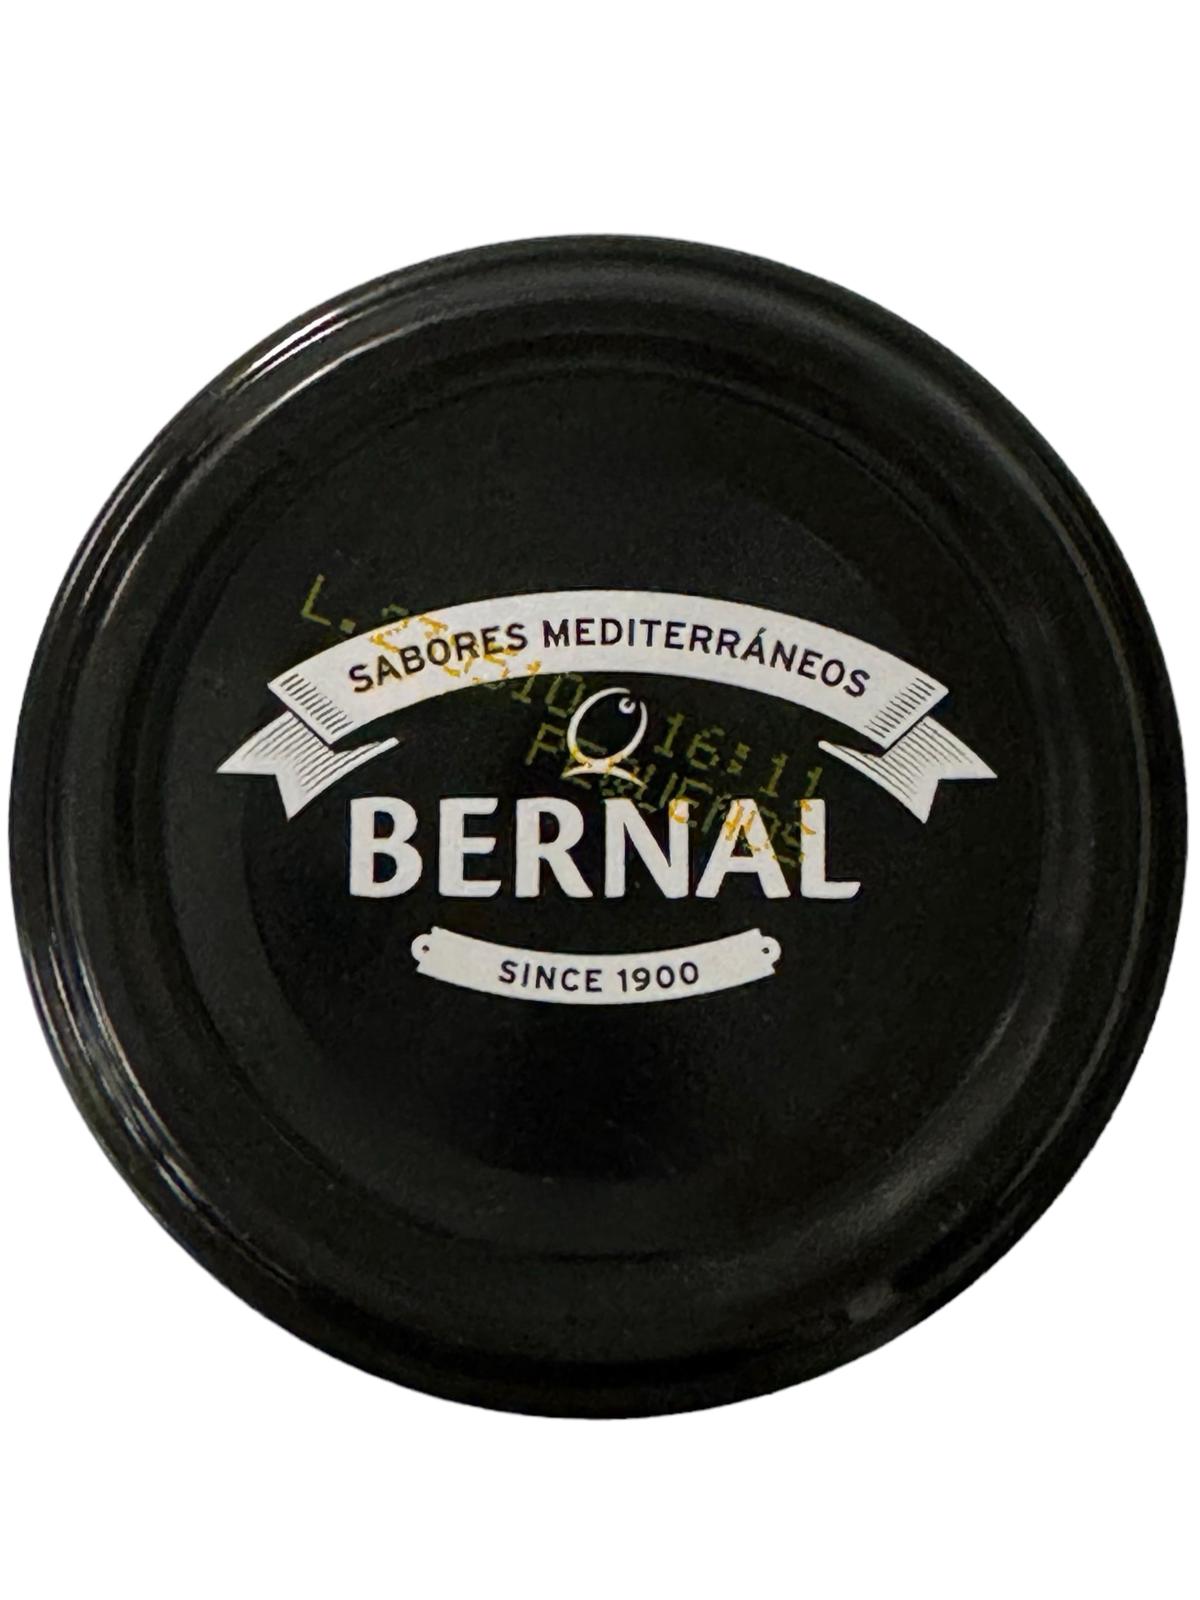 Bernal Especialidades Spanish Olives Cocktail 300g Best Before Feb 2027